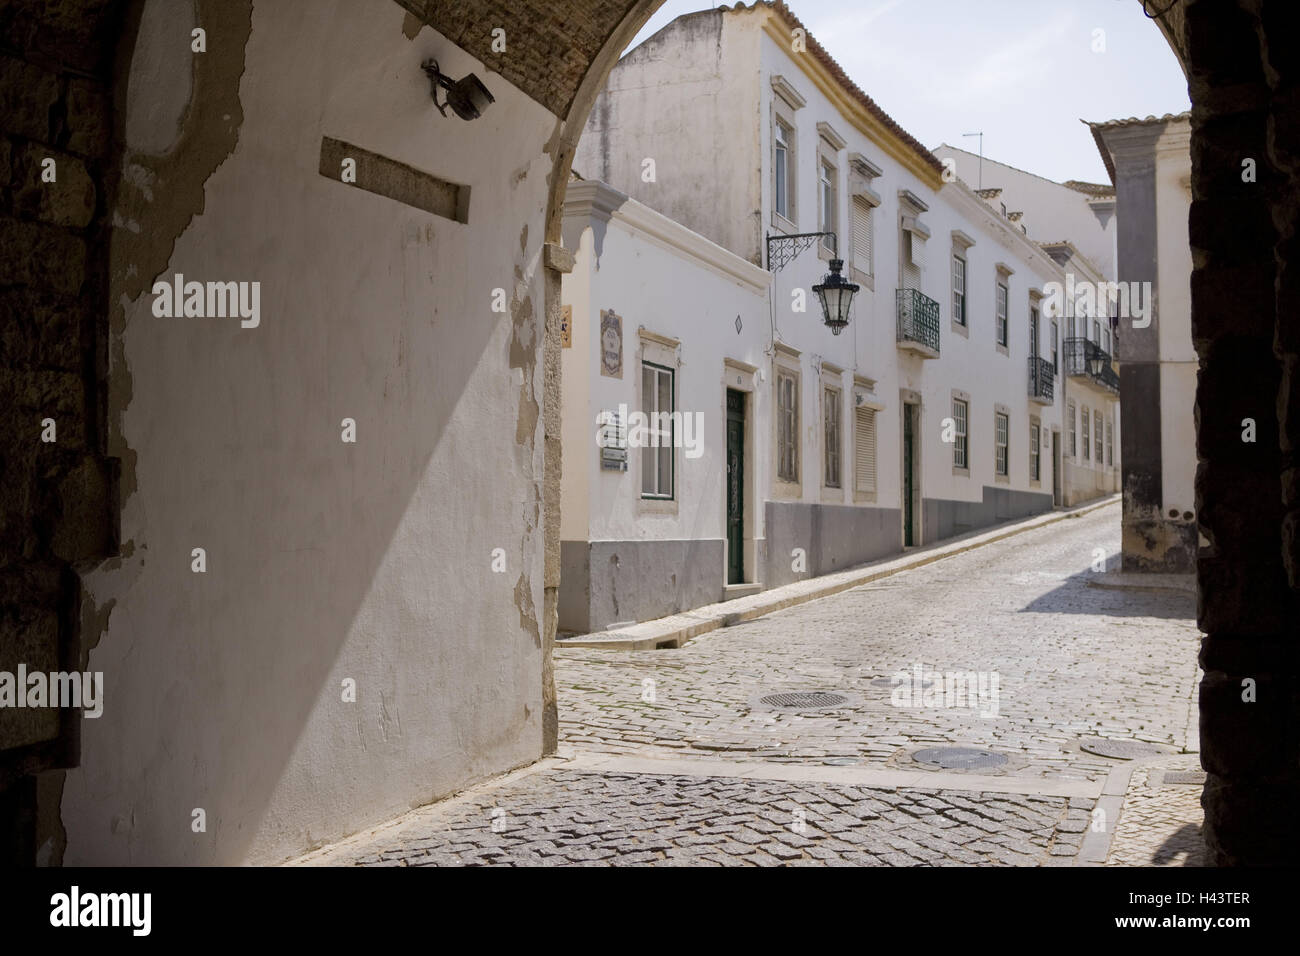 Portugal, Faro, Old Town, doorway, houses, city, gate, archway, cobblestone, cobblestones, houses, historic, lantern, no people, Stock Photo